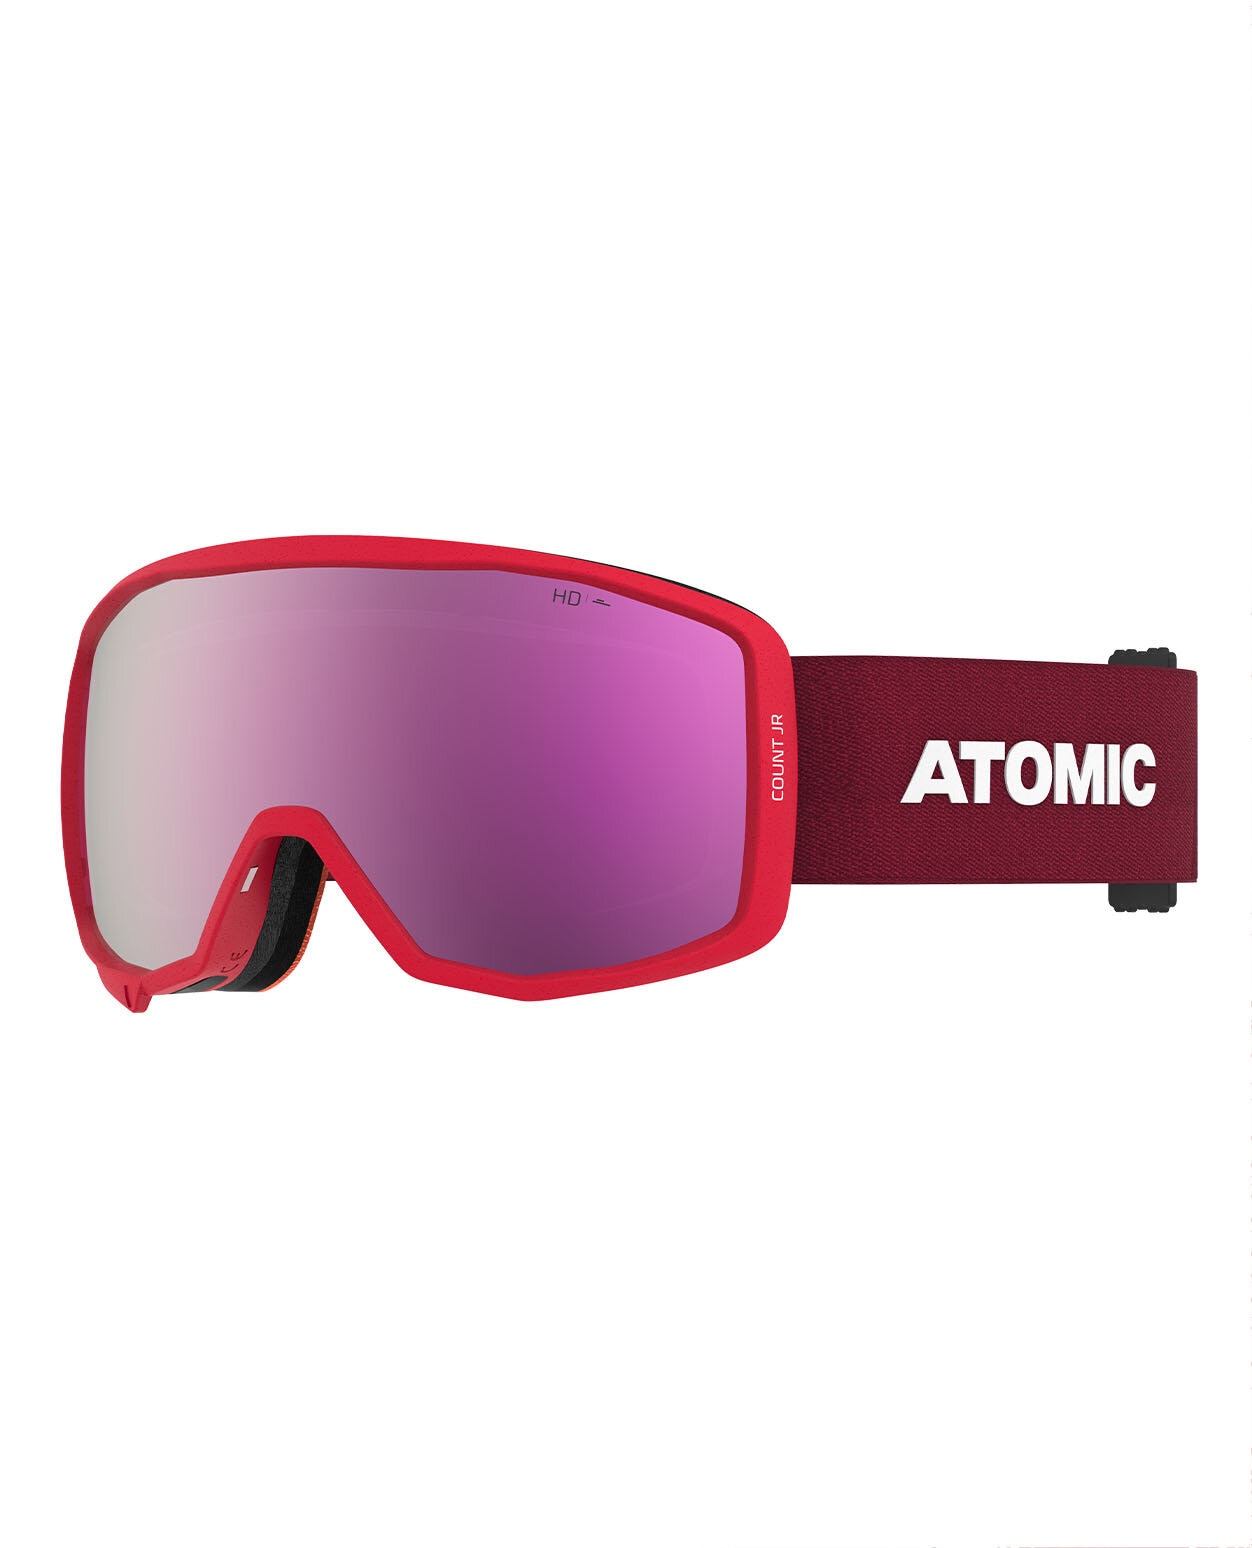 Atomic Count Jr HD RS Red/Pink Copper HD + 2 linser